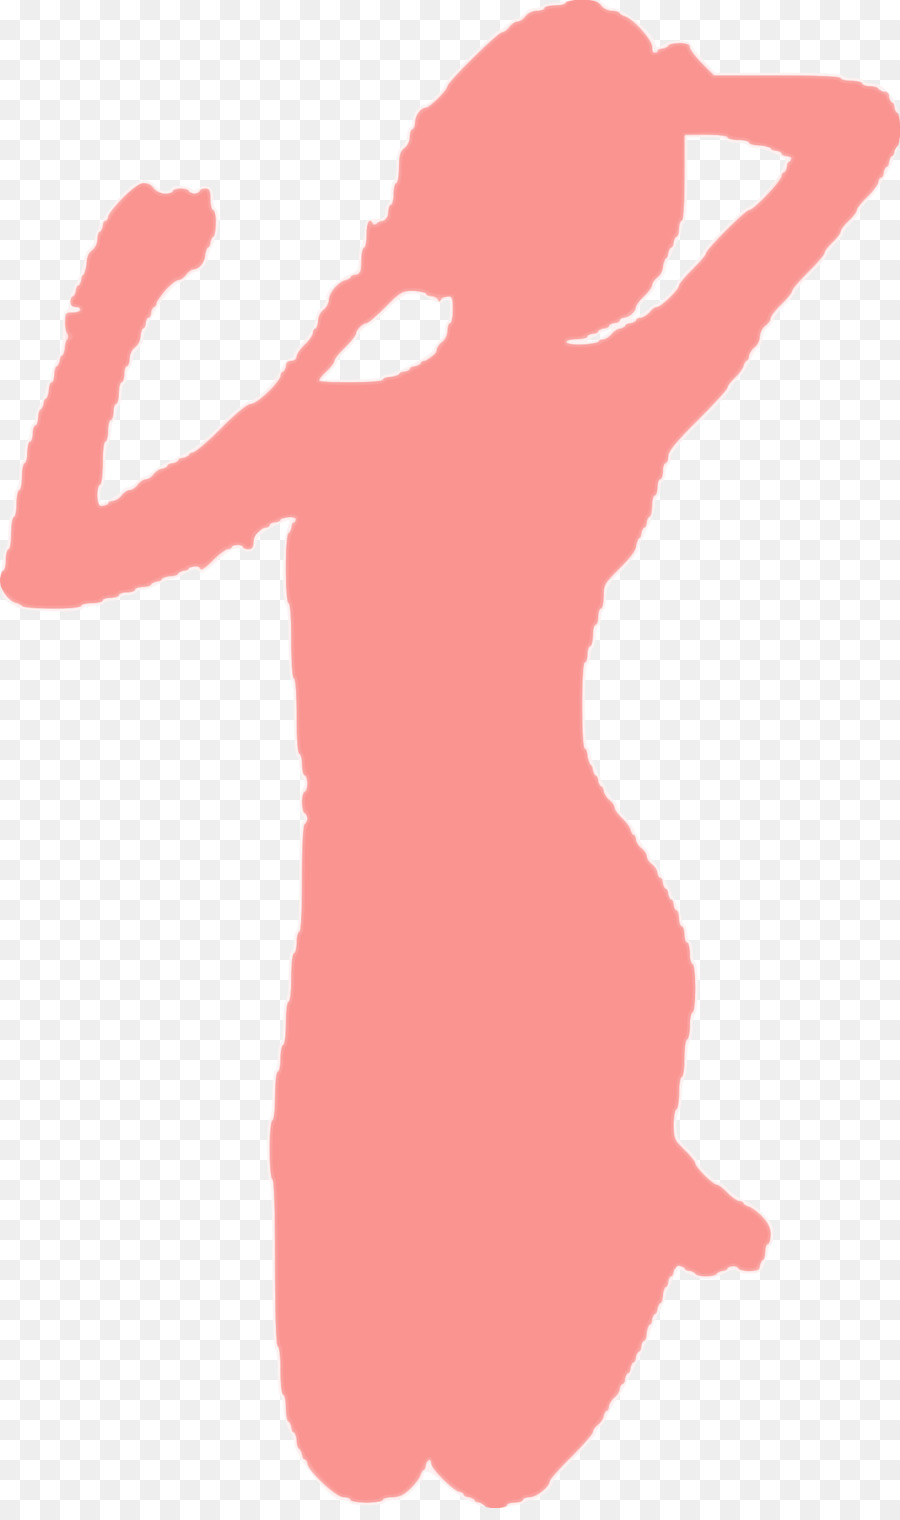 Silhouette Clip art - pregnant woman png download - 1432*2400 - Free Transparent  png Download.